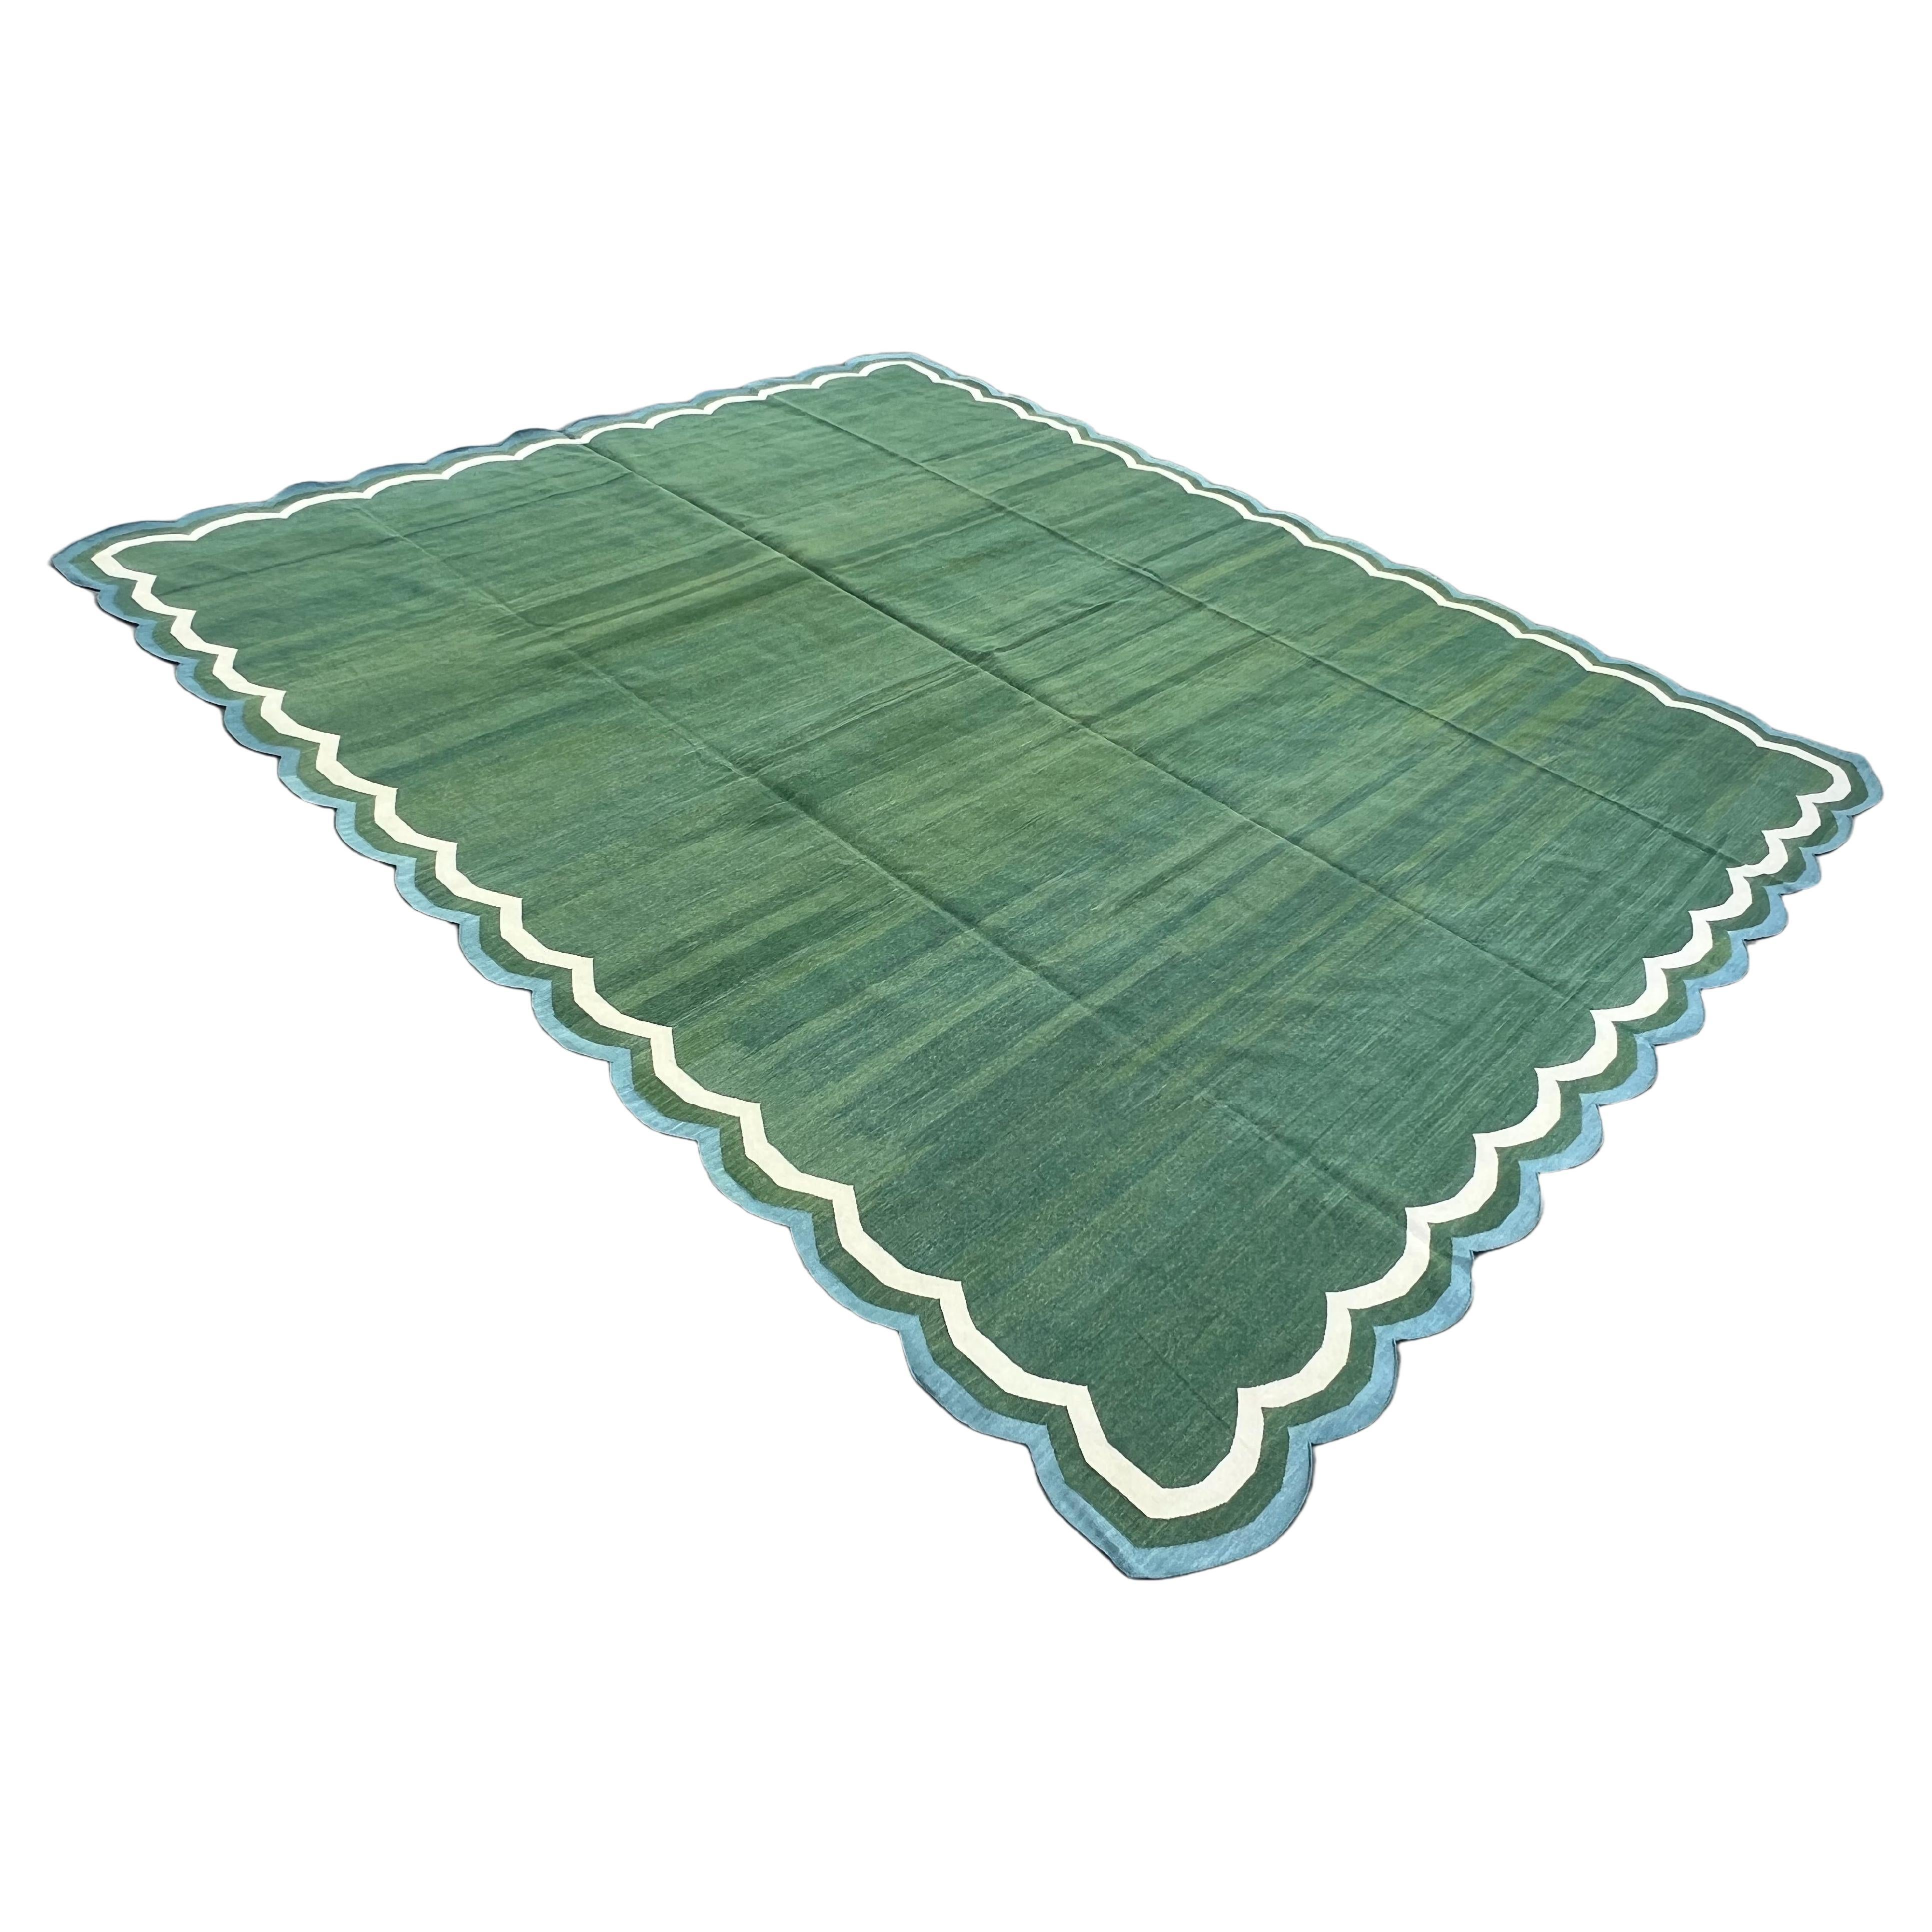 Handmade Cotton Area Flat Weave Rug, 12x15 Green And Blue Scallop Stripe Dhurrie For Sale